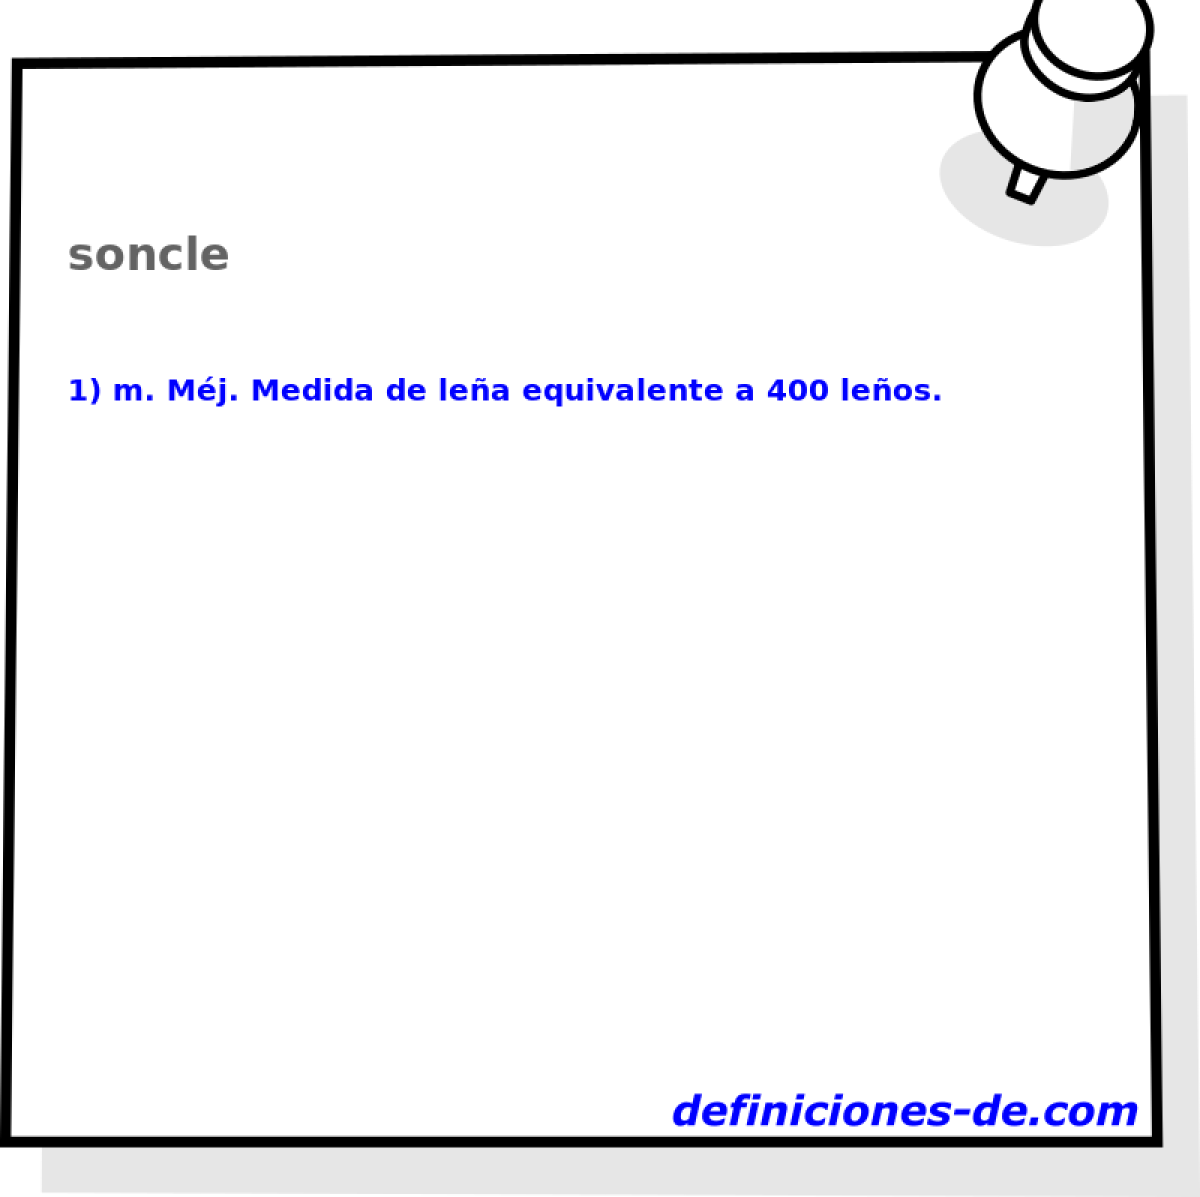 soncle 